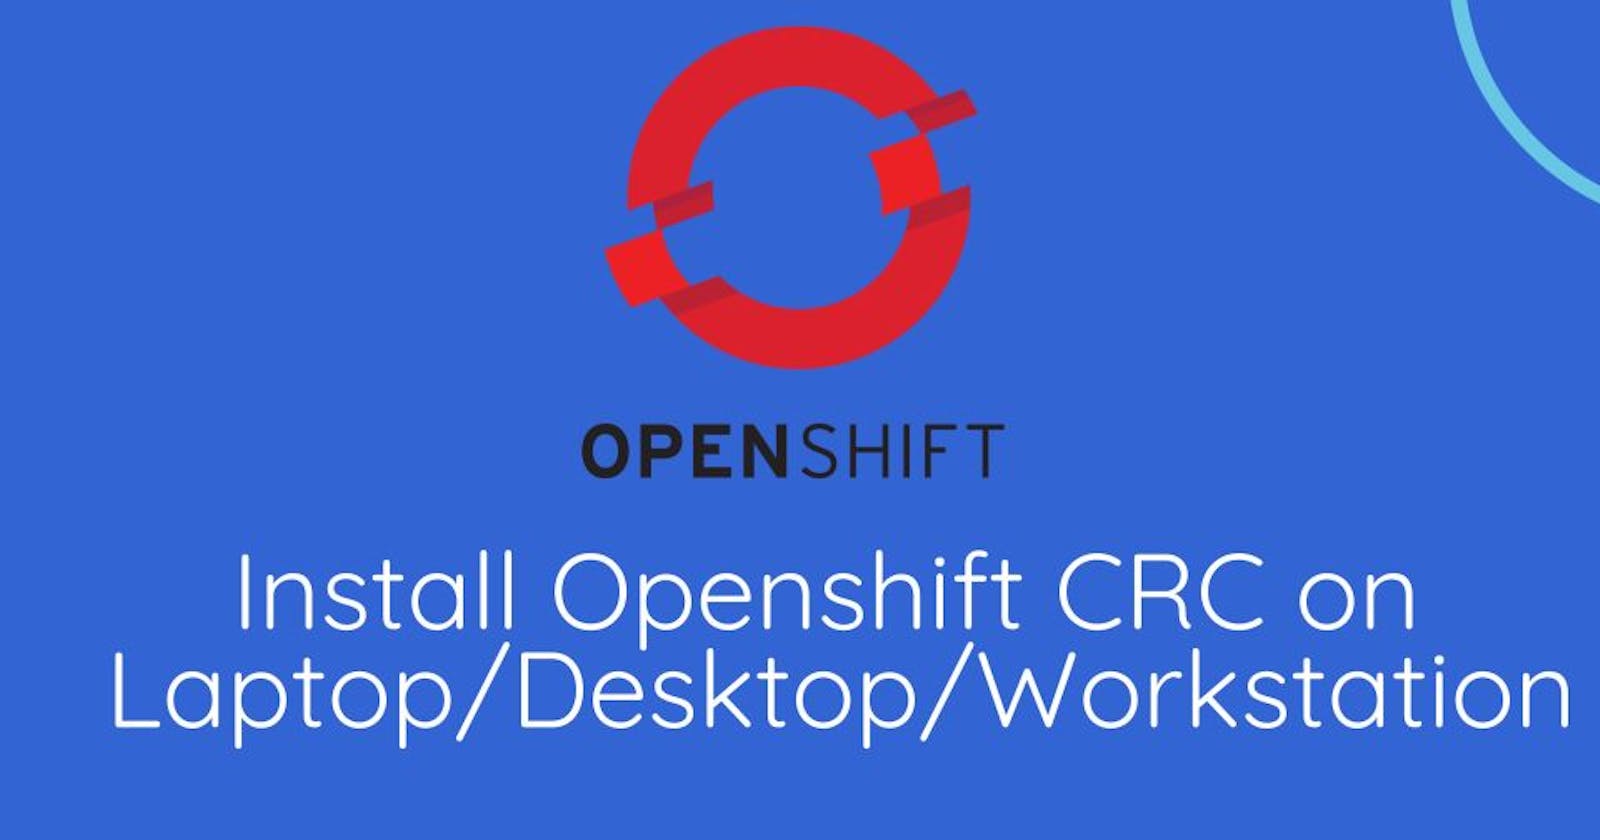 Installing Red Hat OpenShift Code Ready Containers (CRC) on Windows